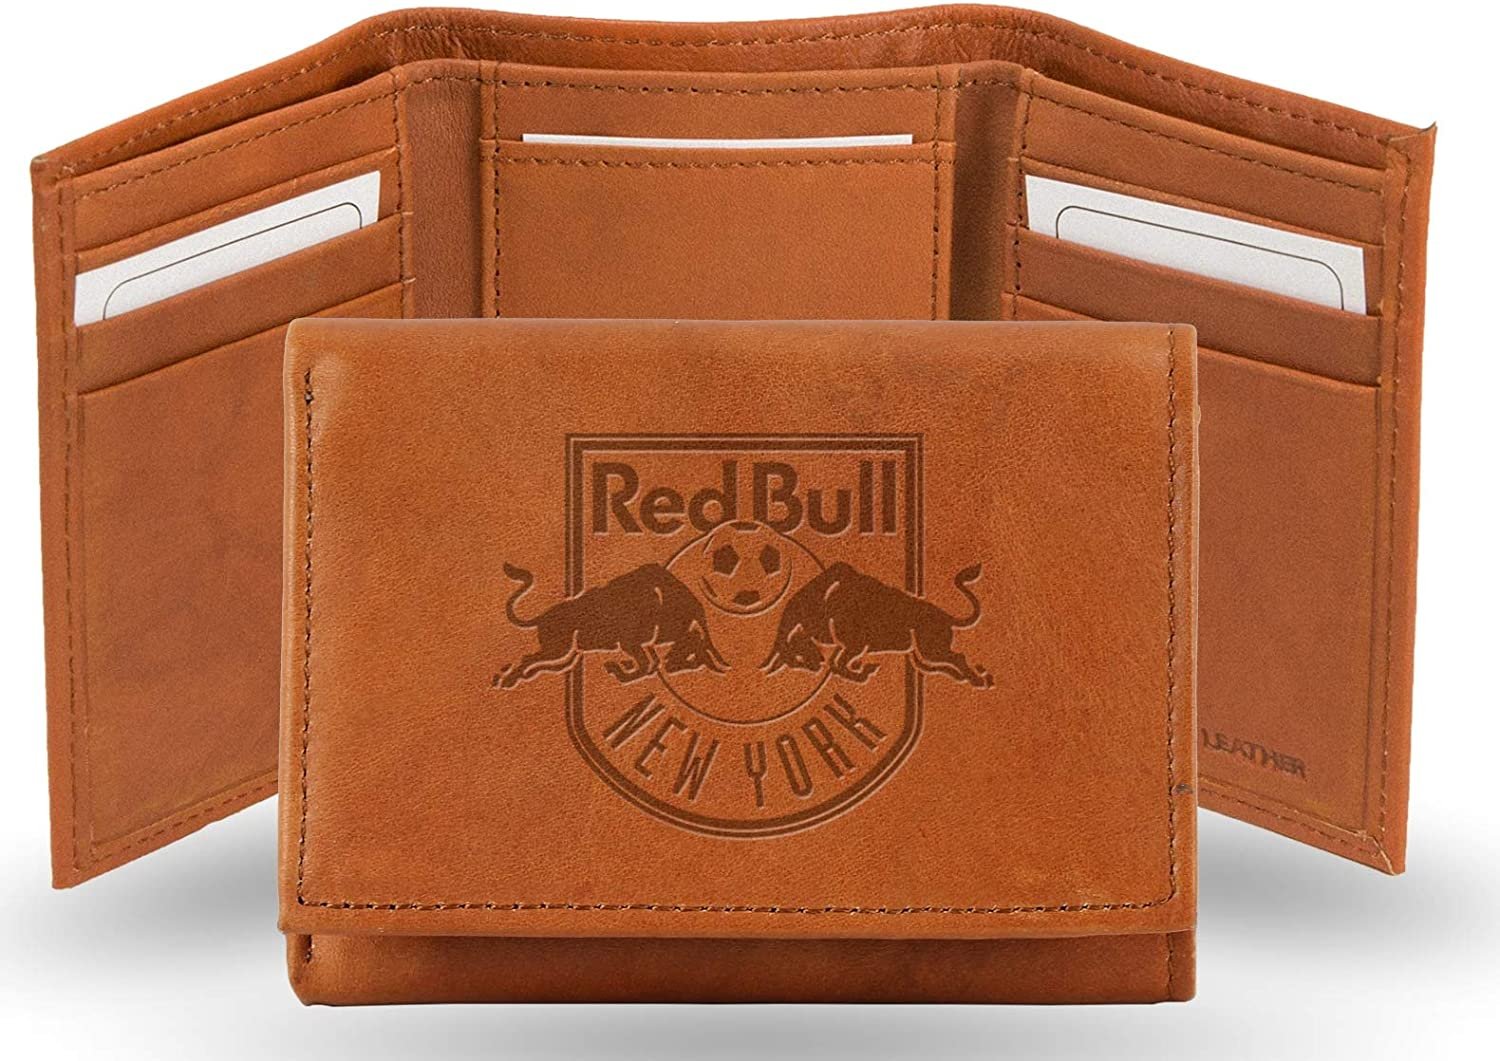 New York Red Bulls Premium Brown Leather Wallet, Trifold, Embossed Laser Engraved